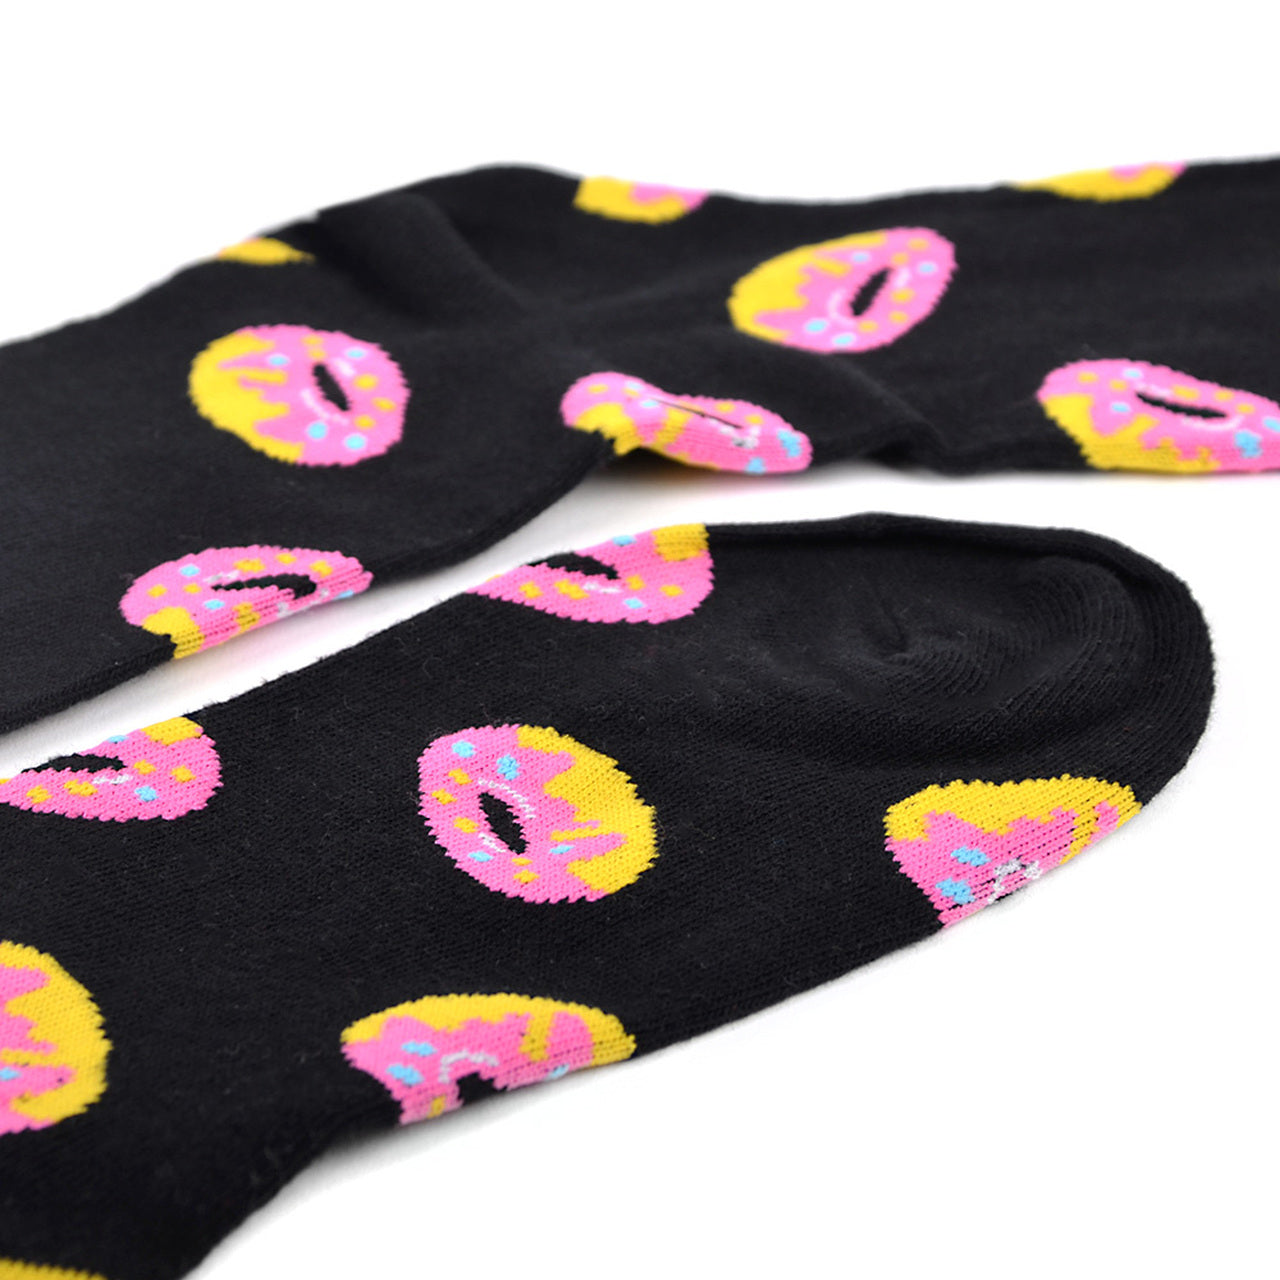 Fun Socks Men's Doughnut Novelty Socks Black and Pink Donut Lovers Bakery Pastries Donuts Gift for Dad